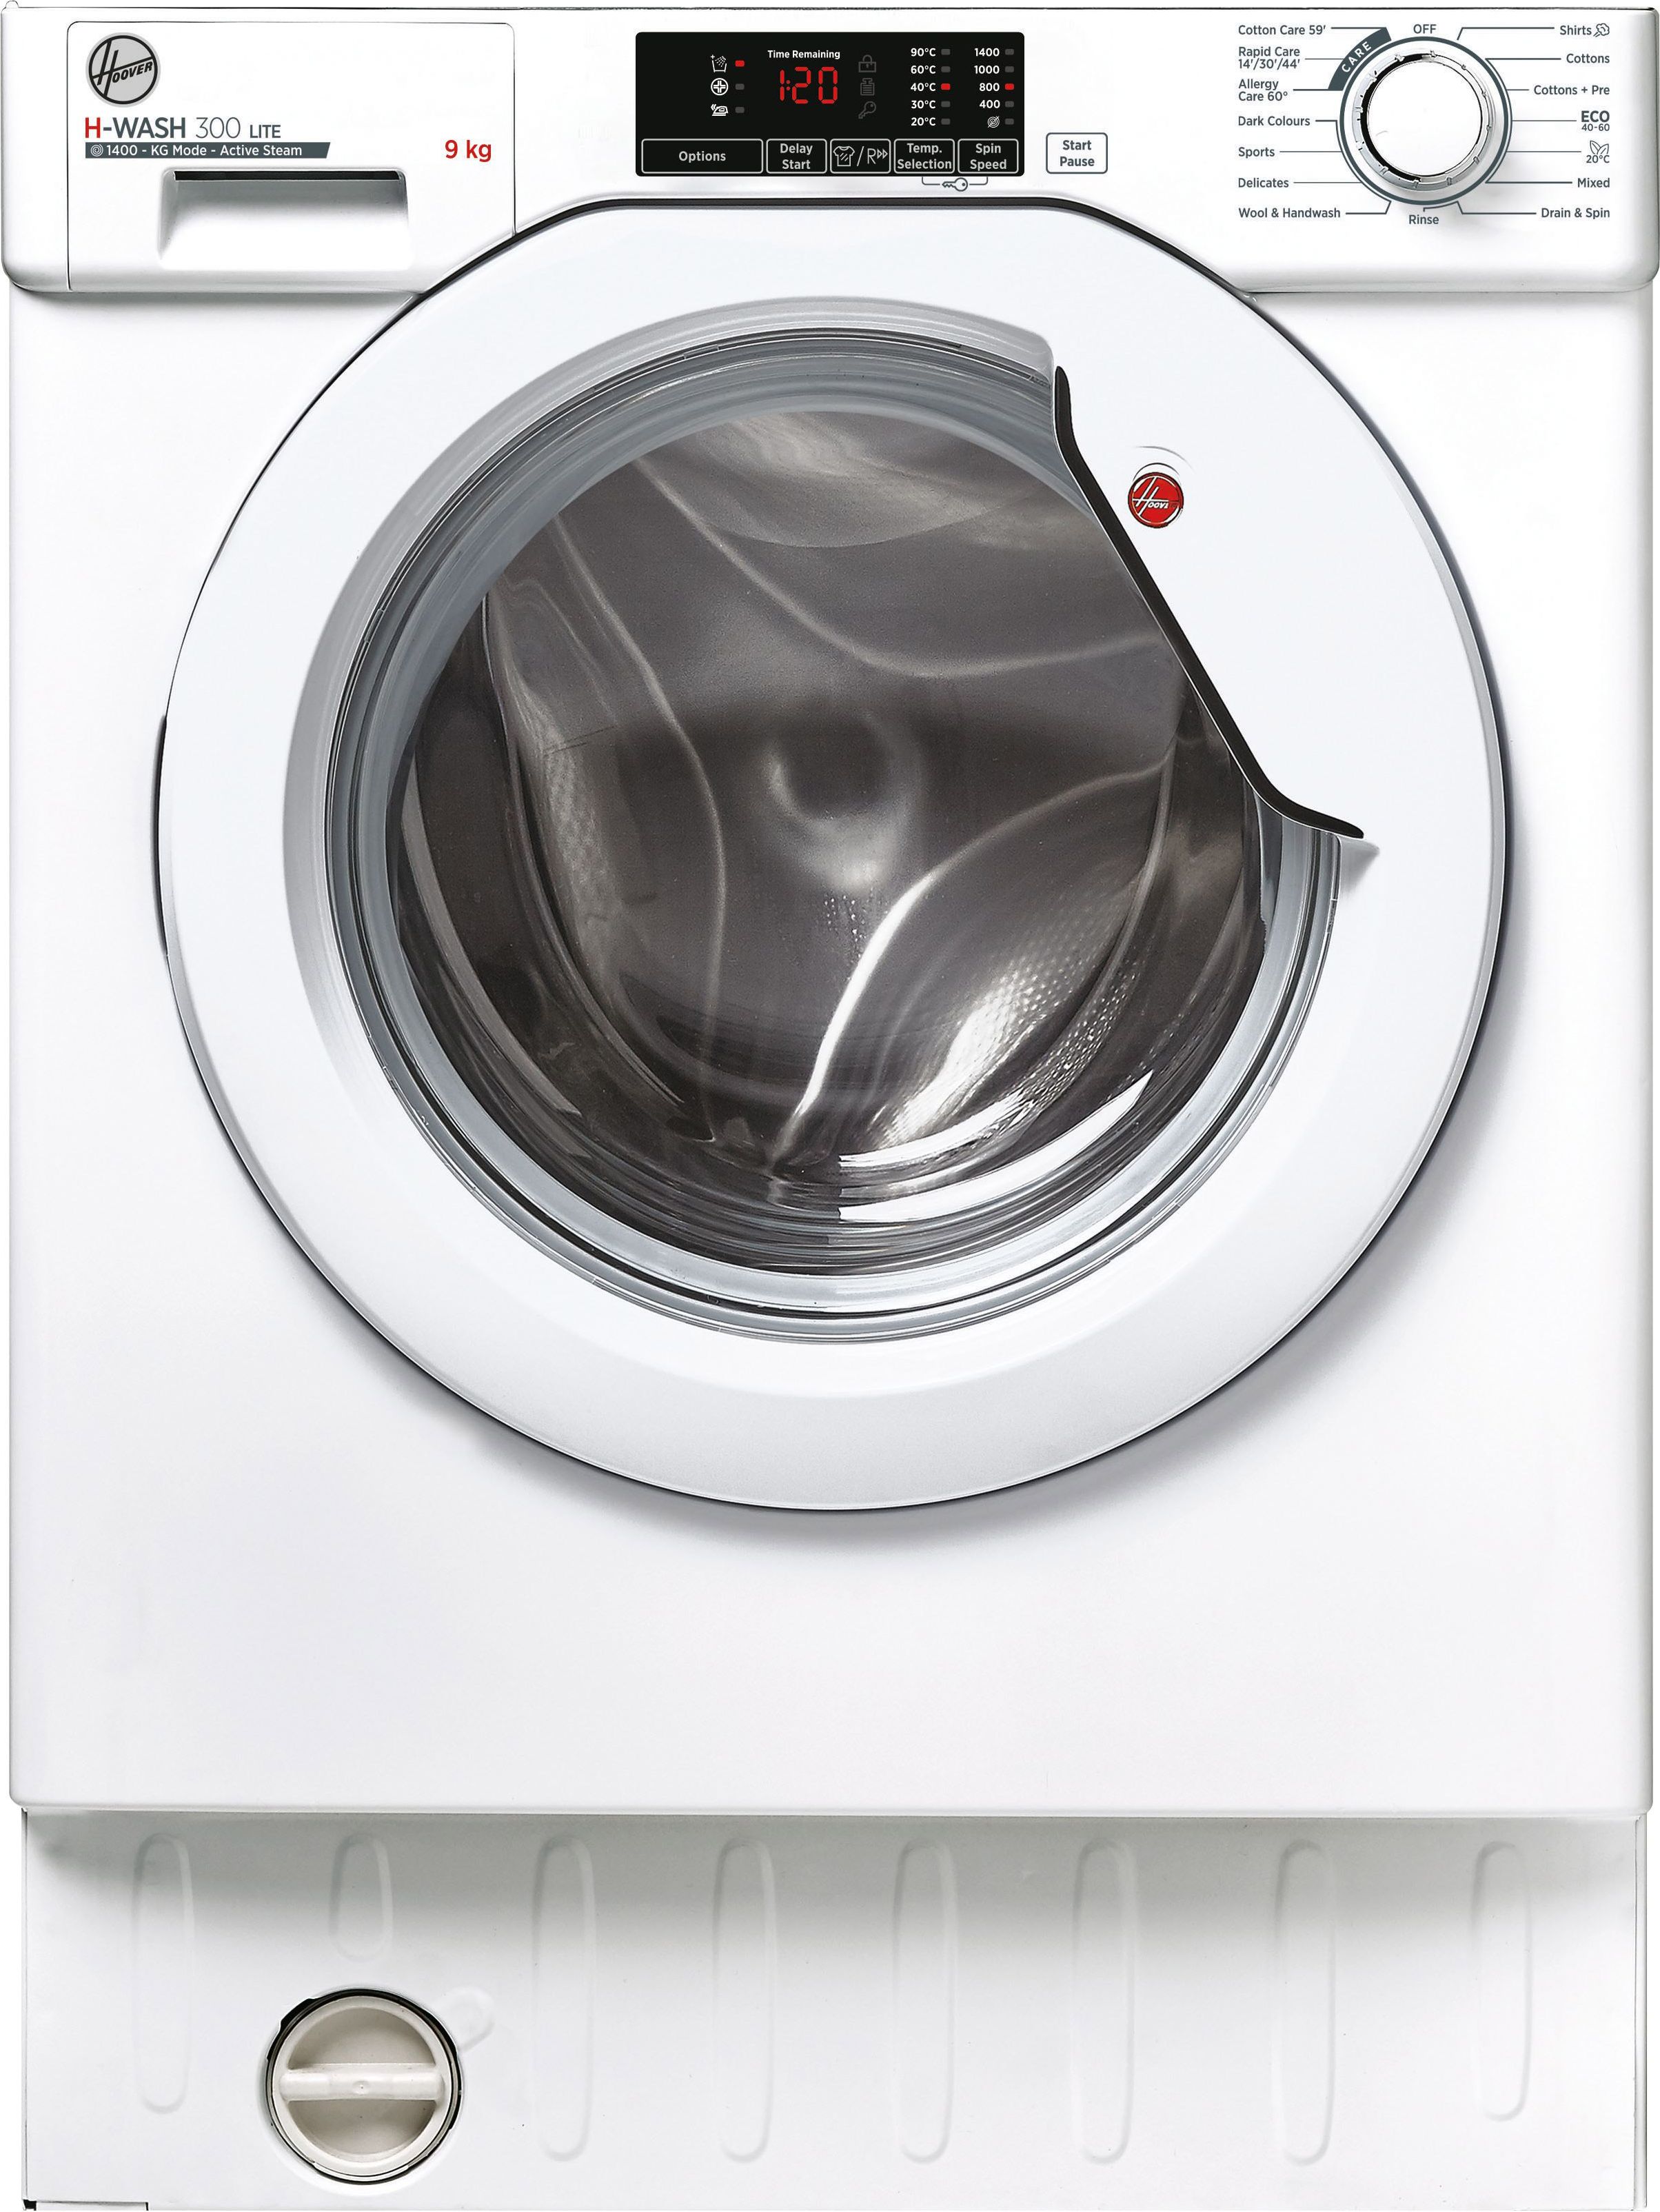 Hoover H-WASH 300 LITE HBWS49D1W4 Integrated 9kg Washing Machine with 1400 rpm - White - B Rated, White